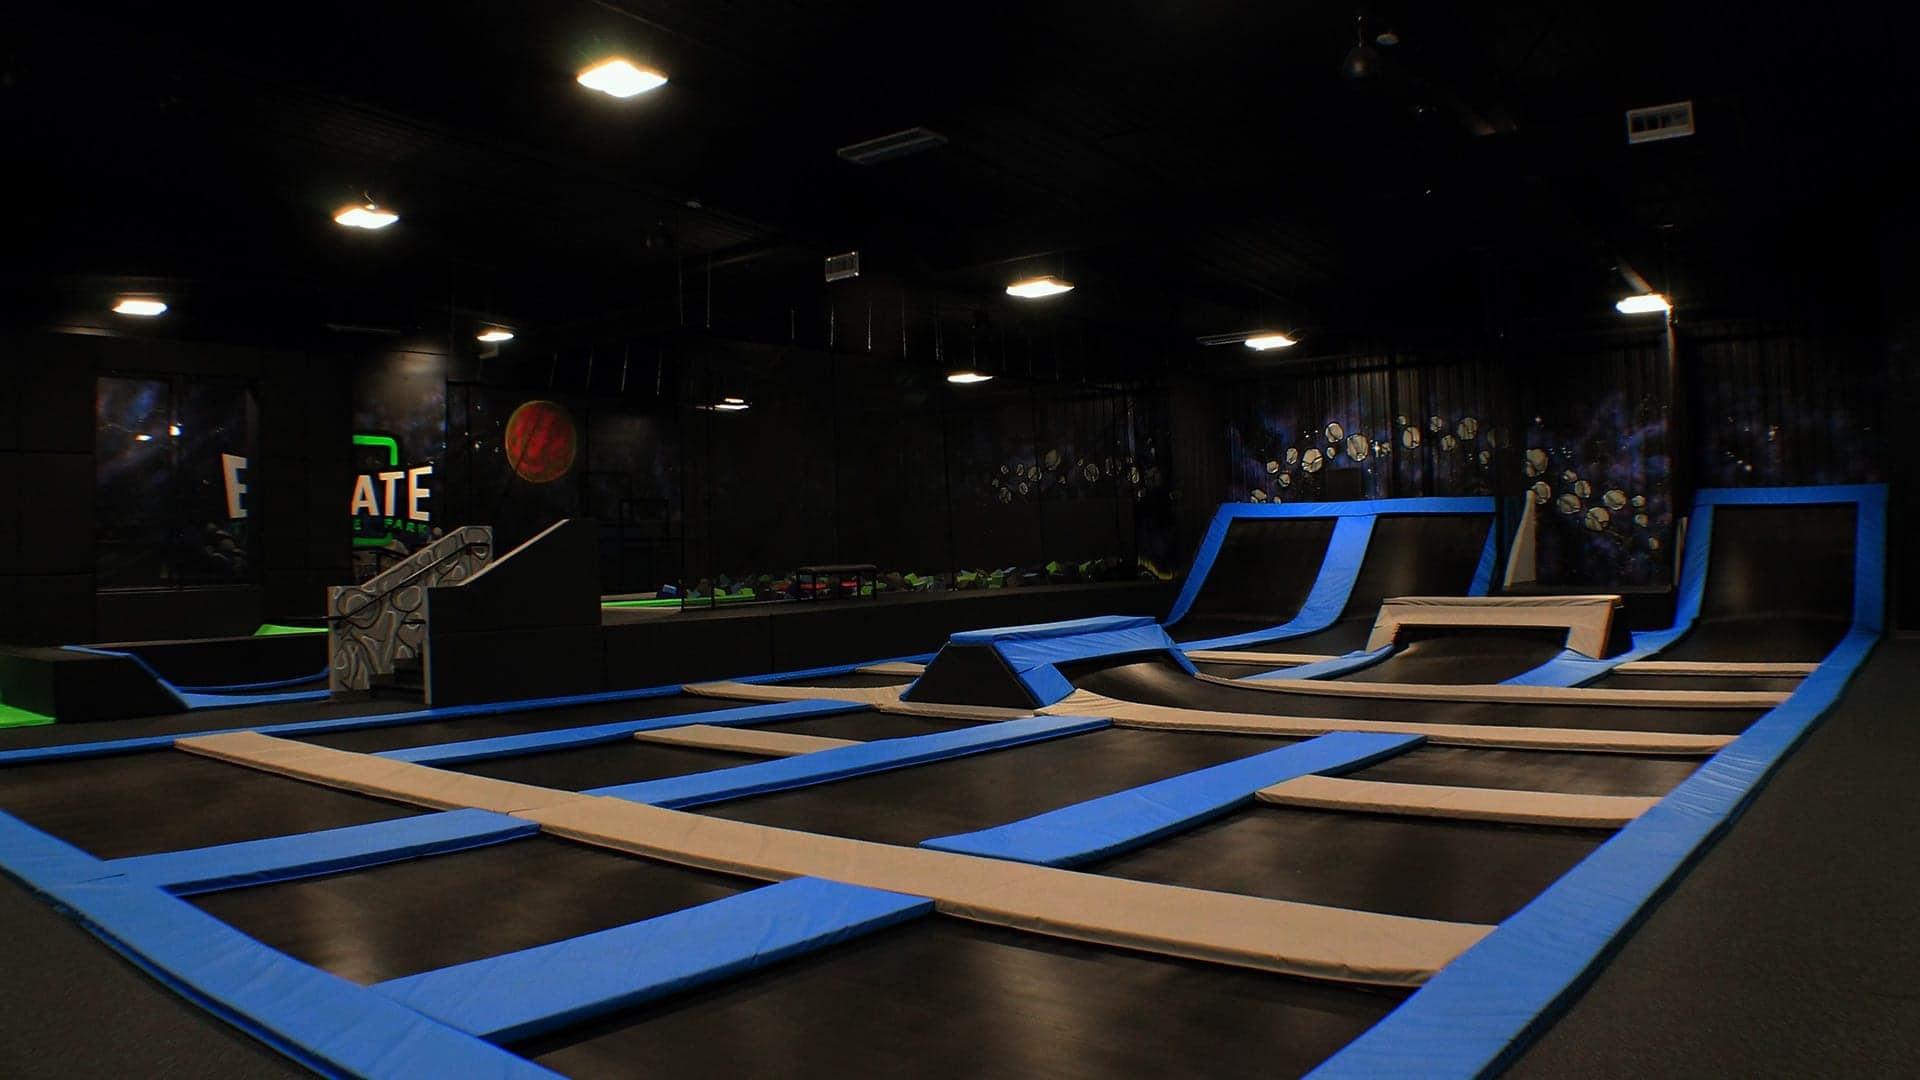 Trampolining: Multi-level trampoline park, Outdoor recreational activity, A family leisure and sports. 1920x1080 Full HD Wallpaper.